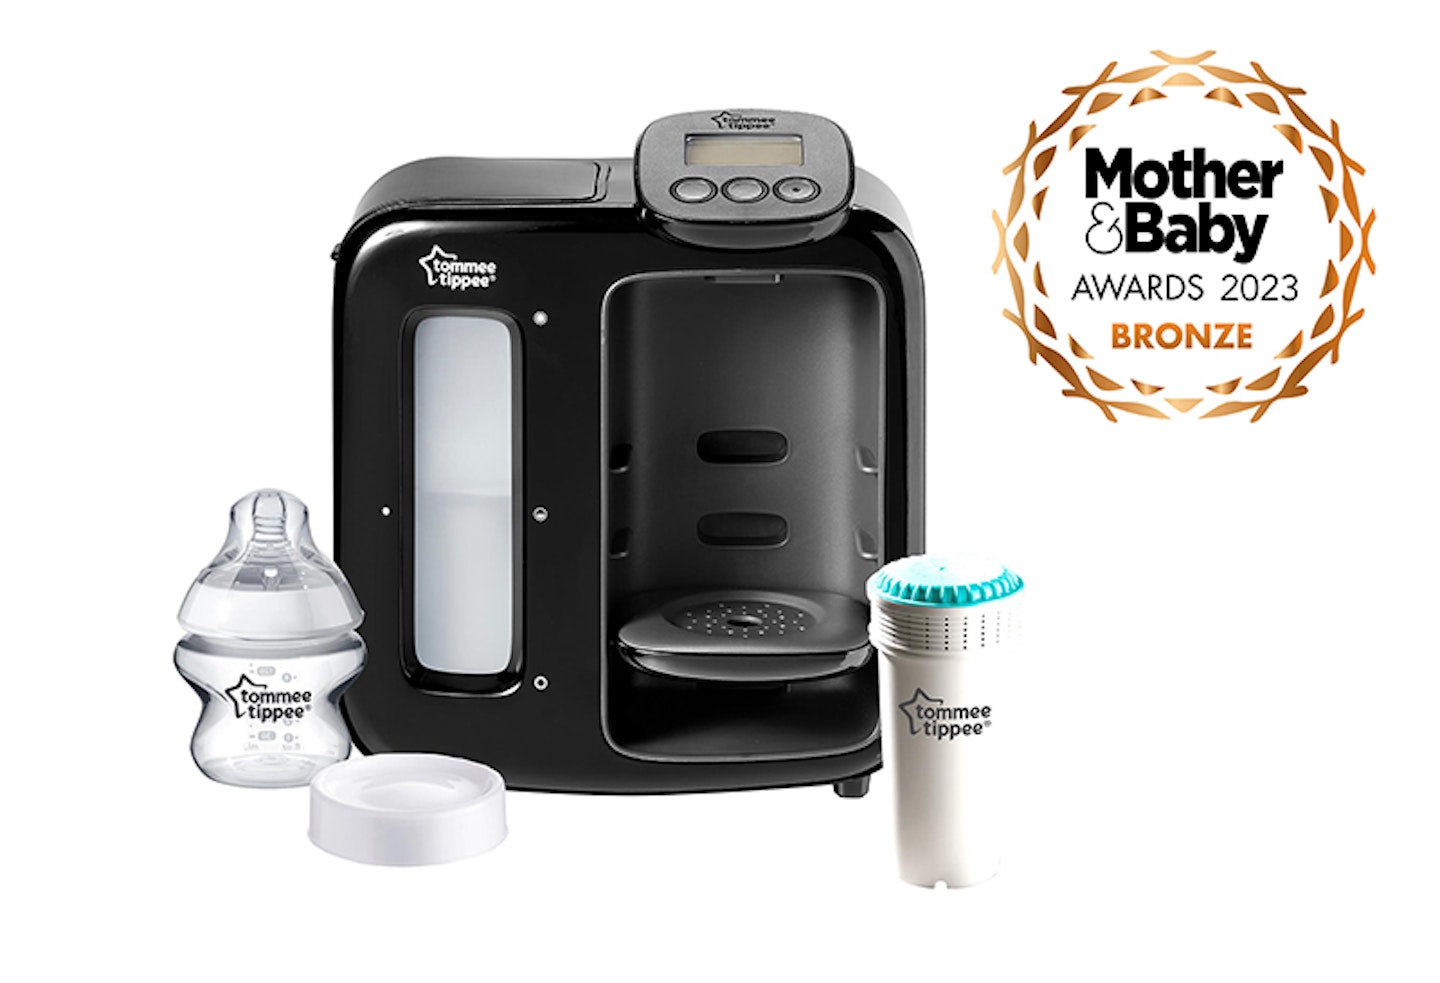 Tommee Tippee Perfect Prep M&B awards 2023